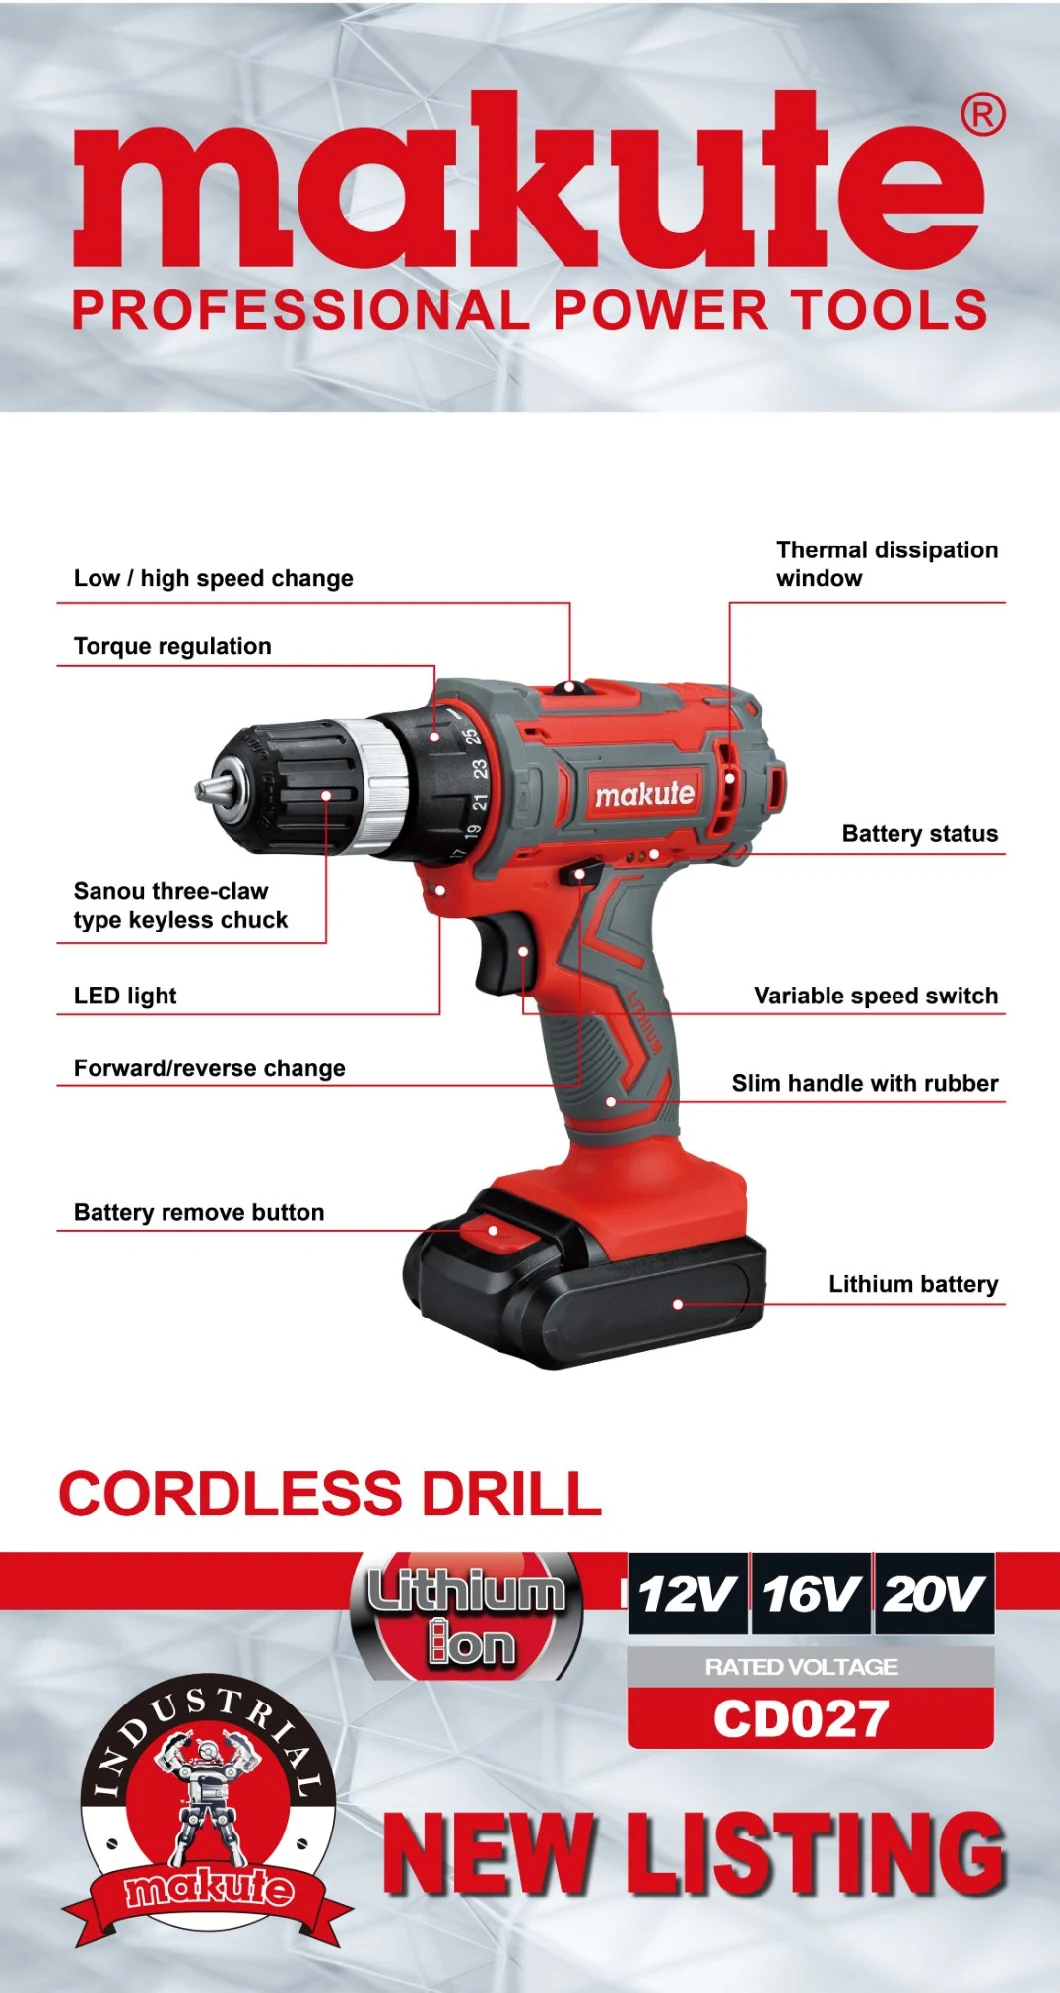 Makute Two 15cc Battery Cordless Drill 12/16/20V Lion Battery